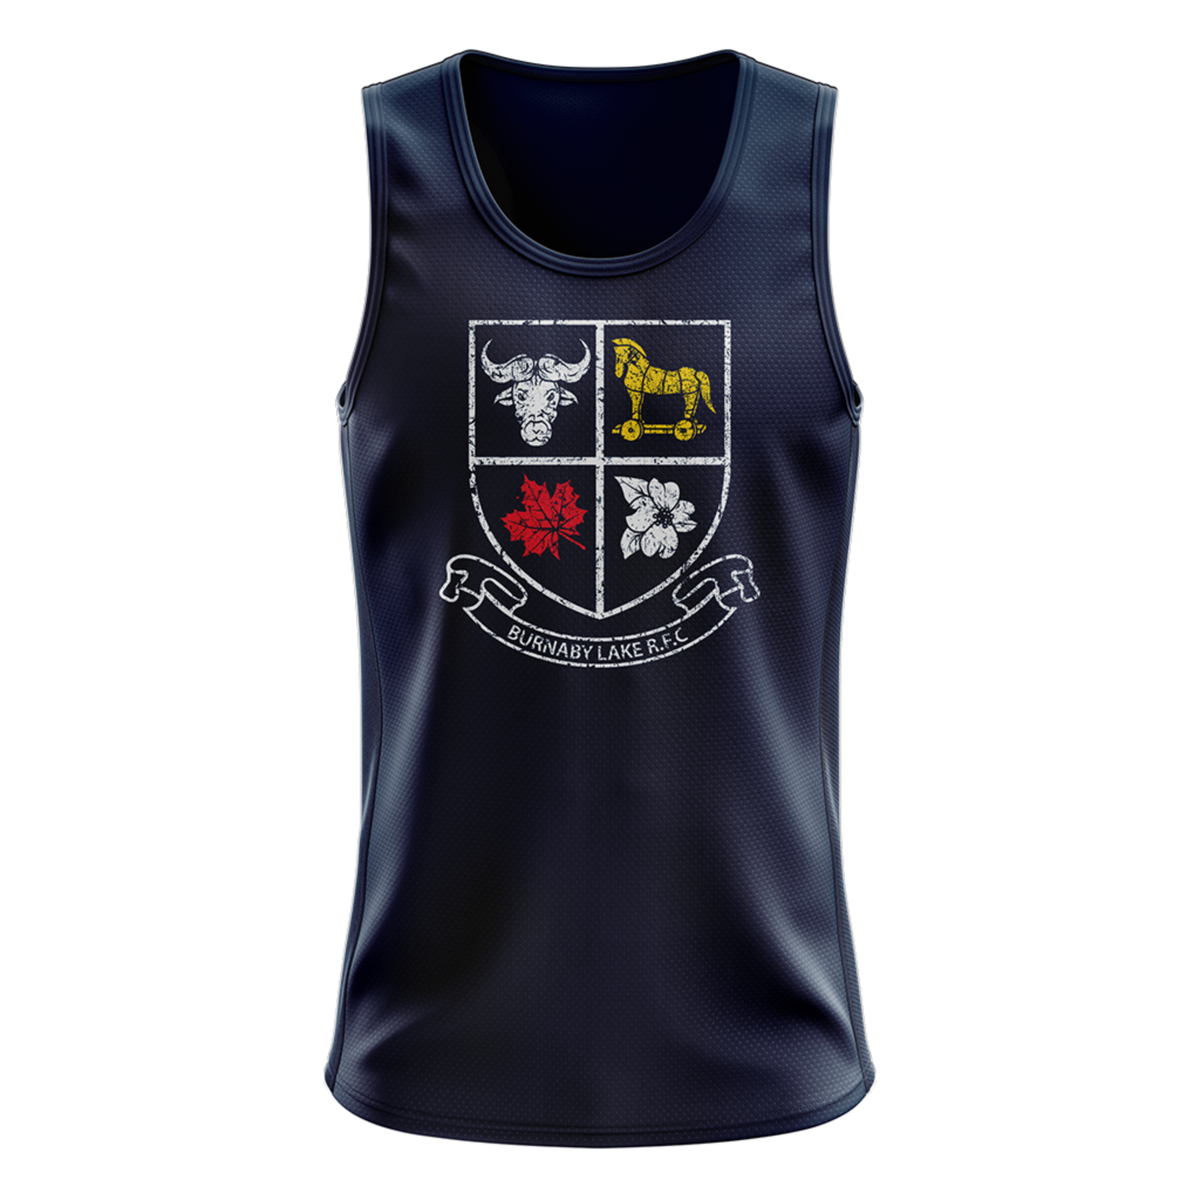 Burnaby Lake Rugby Club Singlet - Distressed Color Shield Logo -  Navy  - Available in adult Unisex Sizing XS-4XL